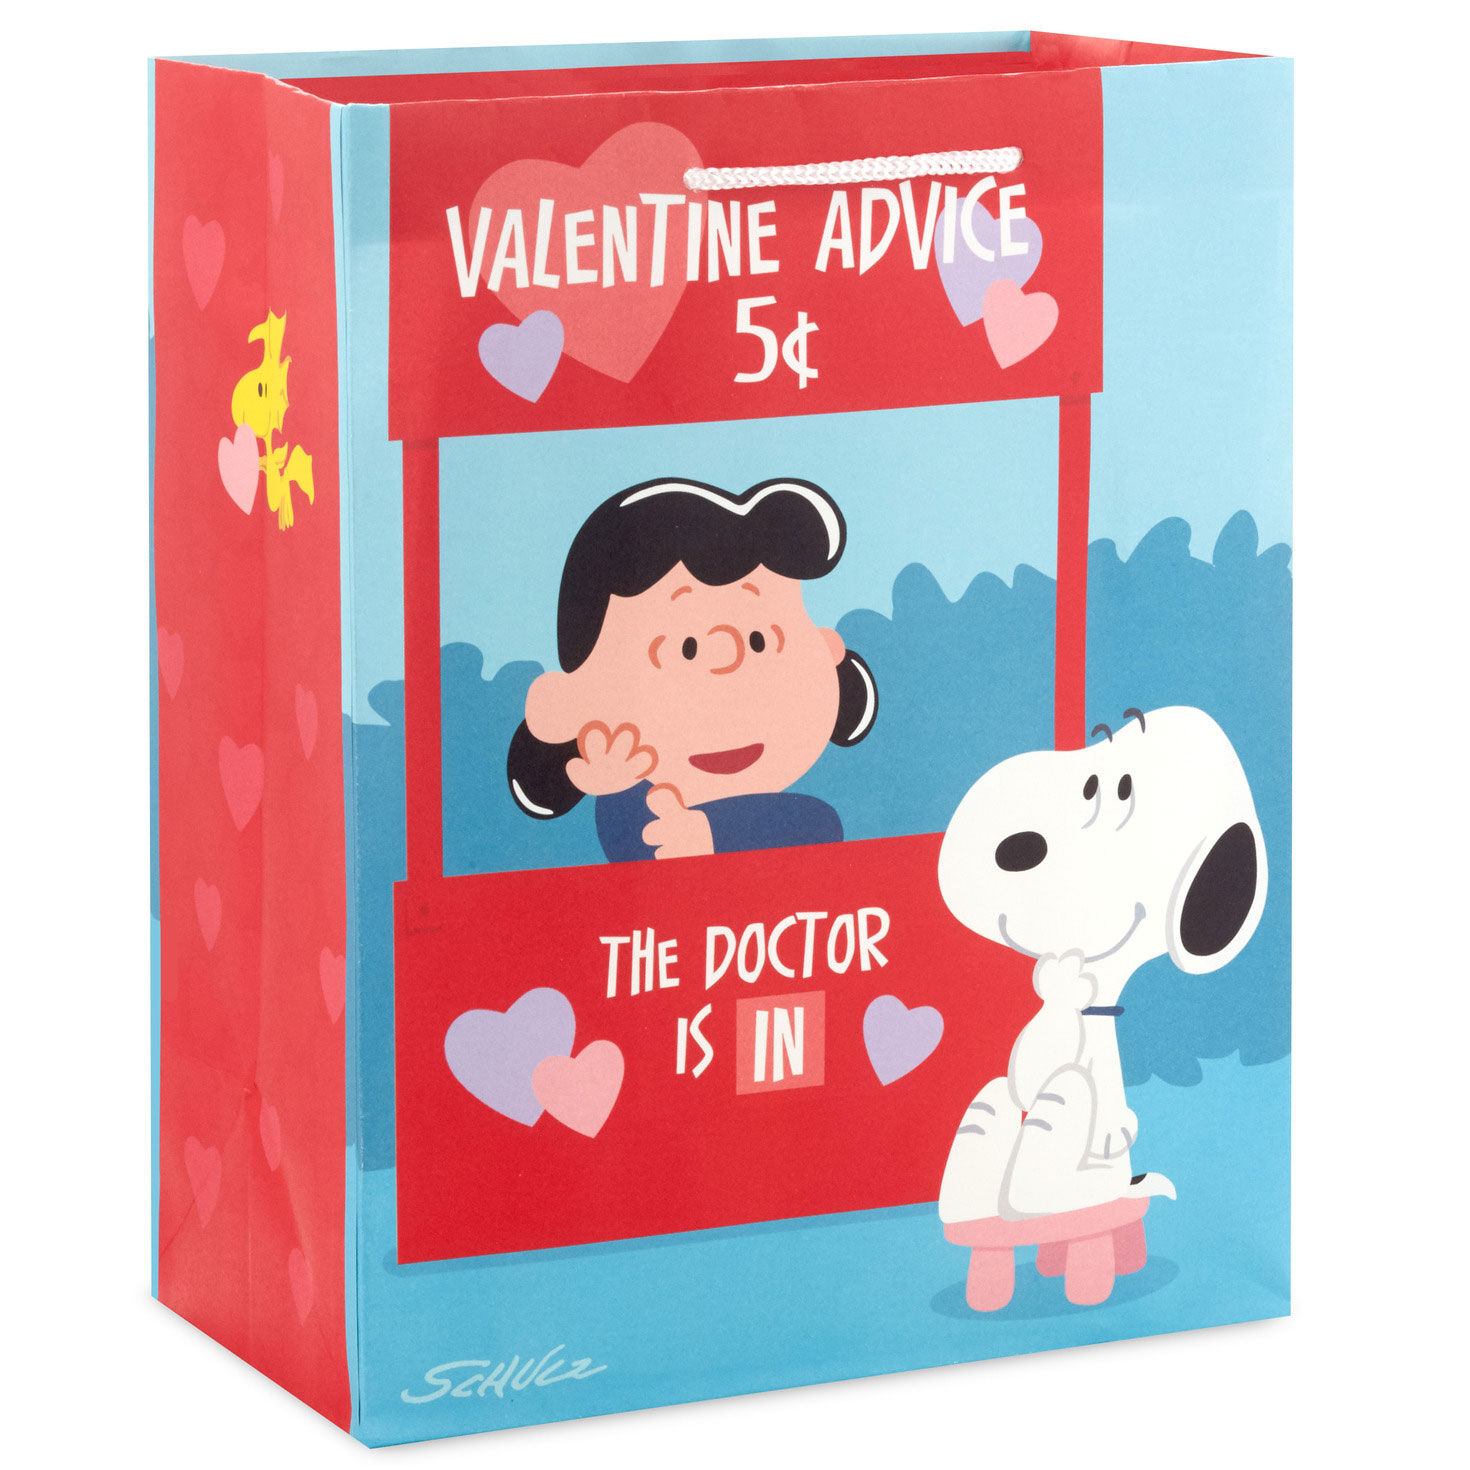 https://www.hallmark.com/dw/image/v2/AALB_PRD/on/demandware.static/-/Sites-hallmark-master/default/dwaded5b79/images/finished-goods/products/1VGB2002/Snoopy-and-Lucy-Medium-Valentines-Day-Gift-Bag_1VGB2002_01.jpg?sfrm=jpg